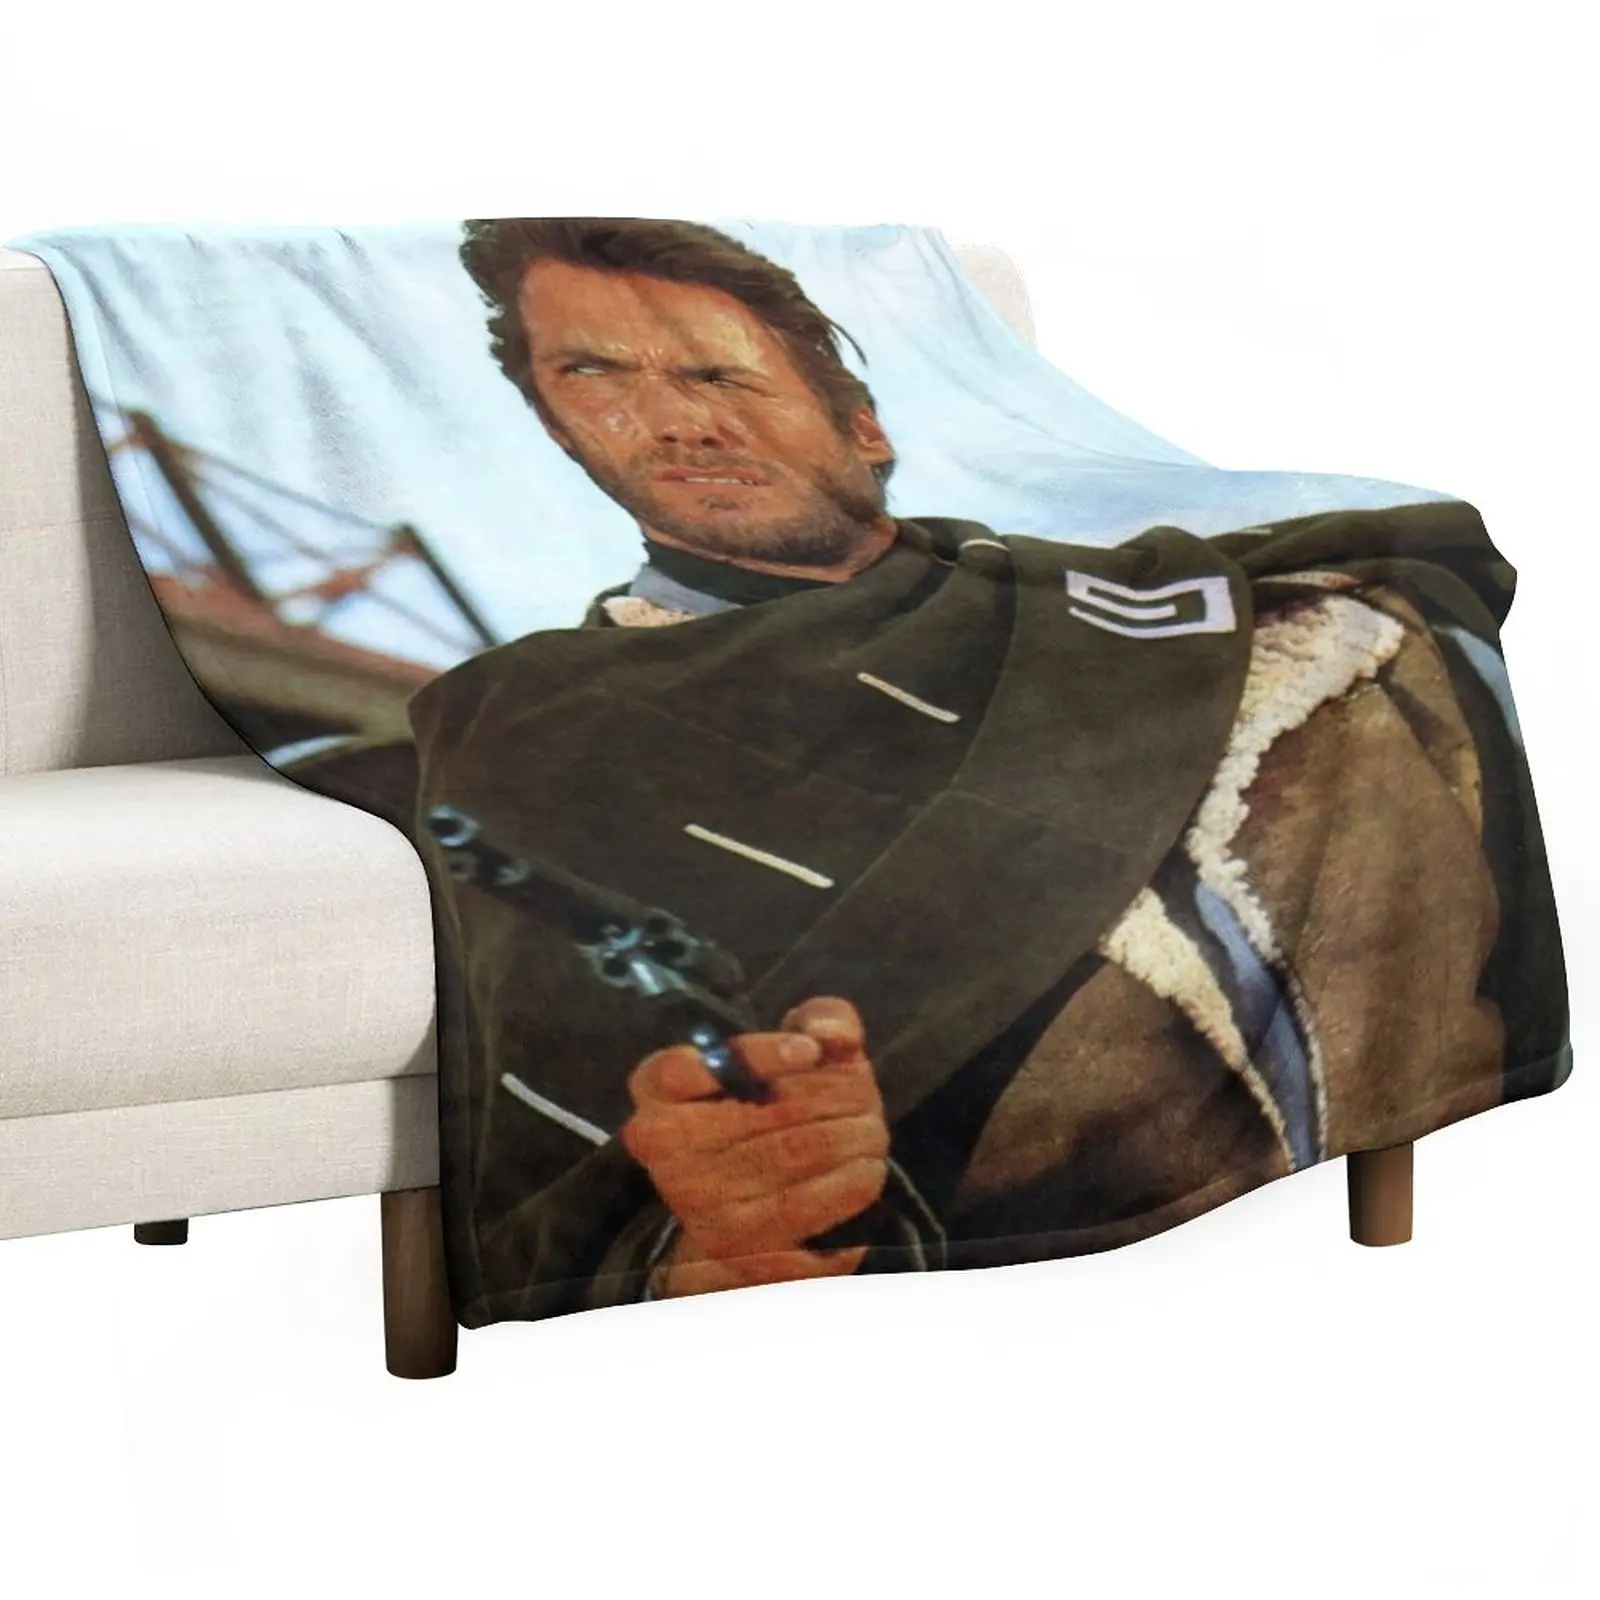 

Clint Eastwood cowboy Throw Blanket Luxury Bed Fluffys Large Decorative Sofas Blankets